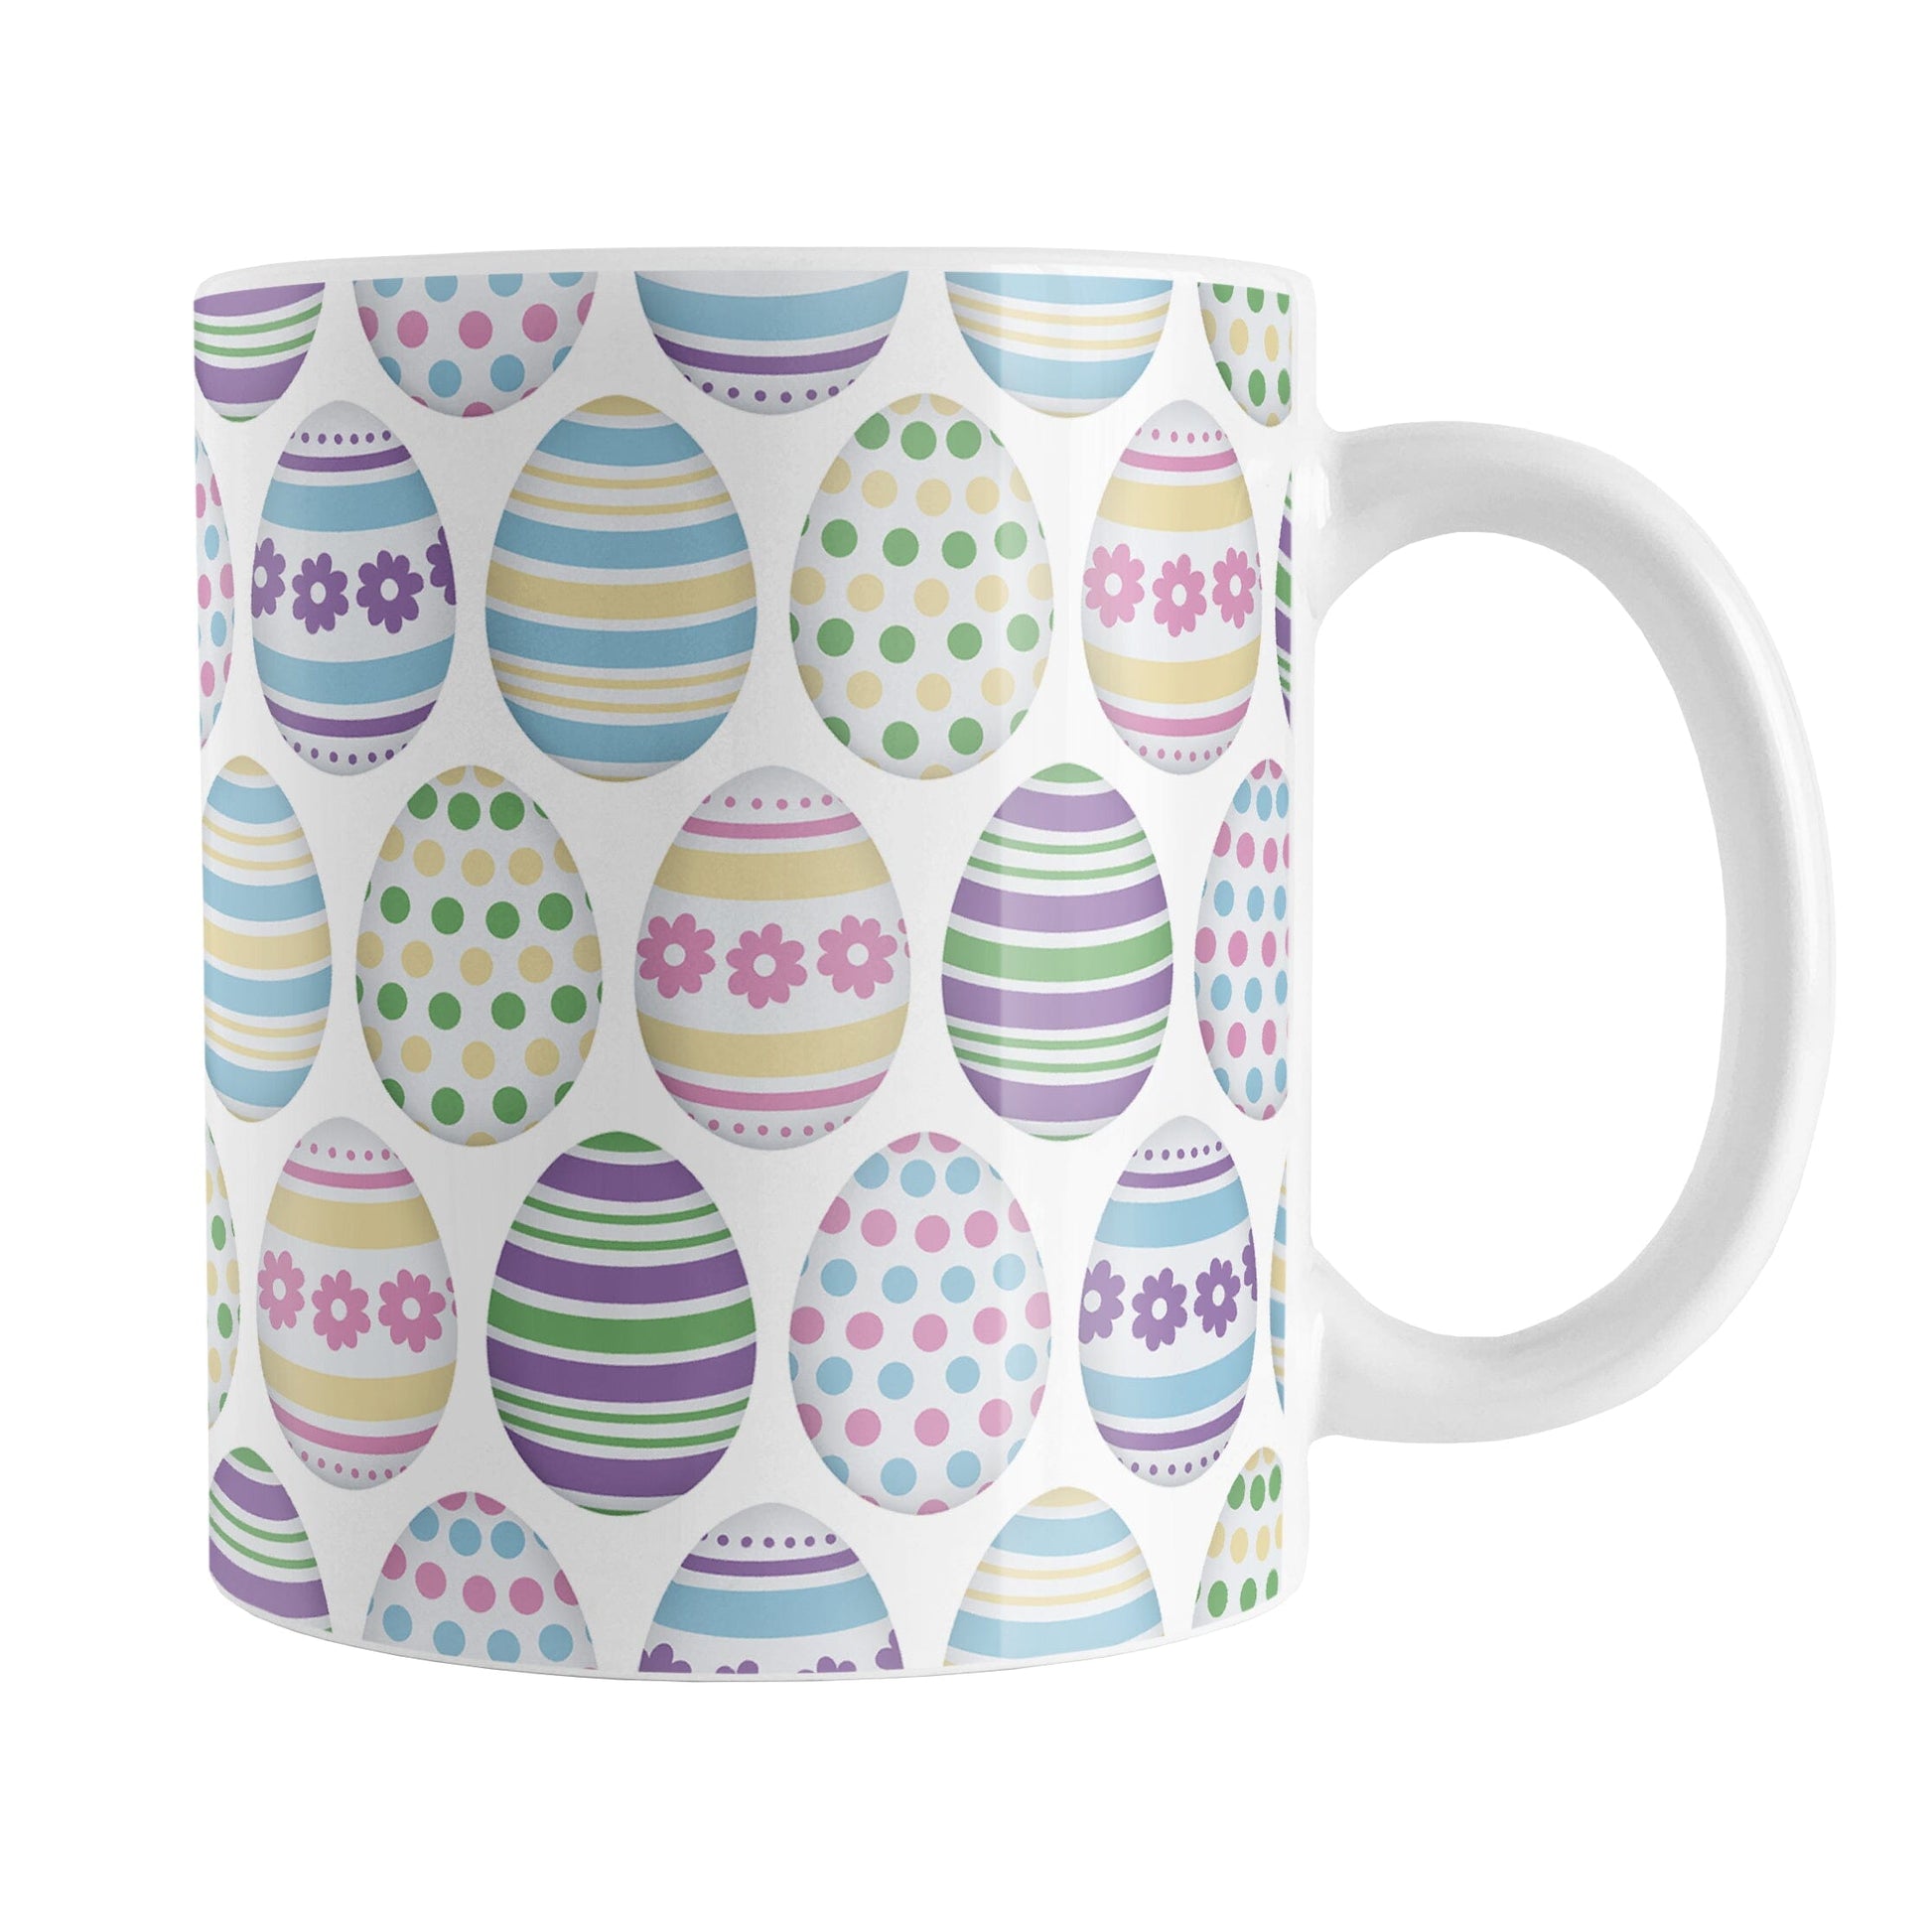 Easter Eggs Mug (11oz) at Amy's Coffee Mugs. A ceramic coffee mug designed with a pattern of Easter eggs decorated with stripes, polka dots, and flowers in fun Easter-inspired colors.